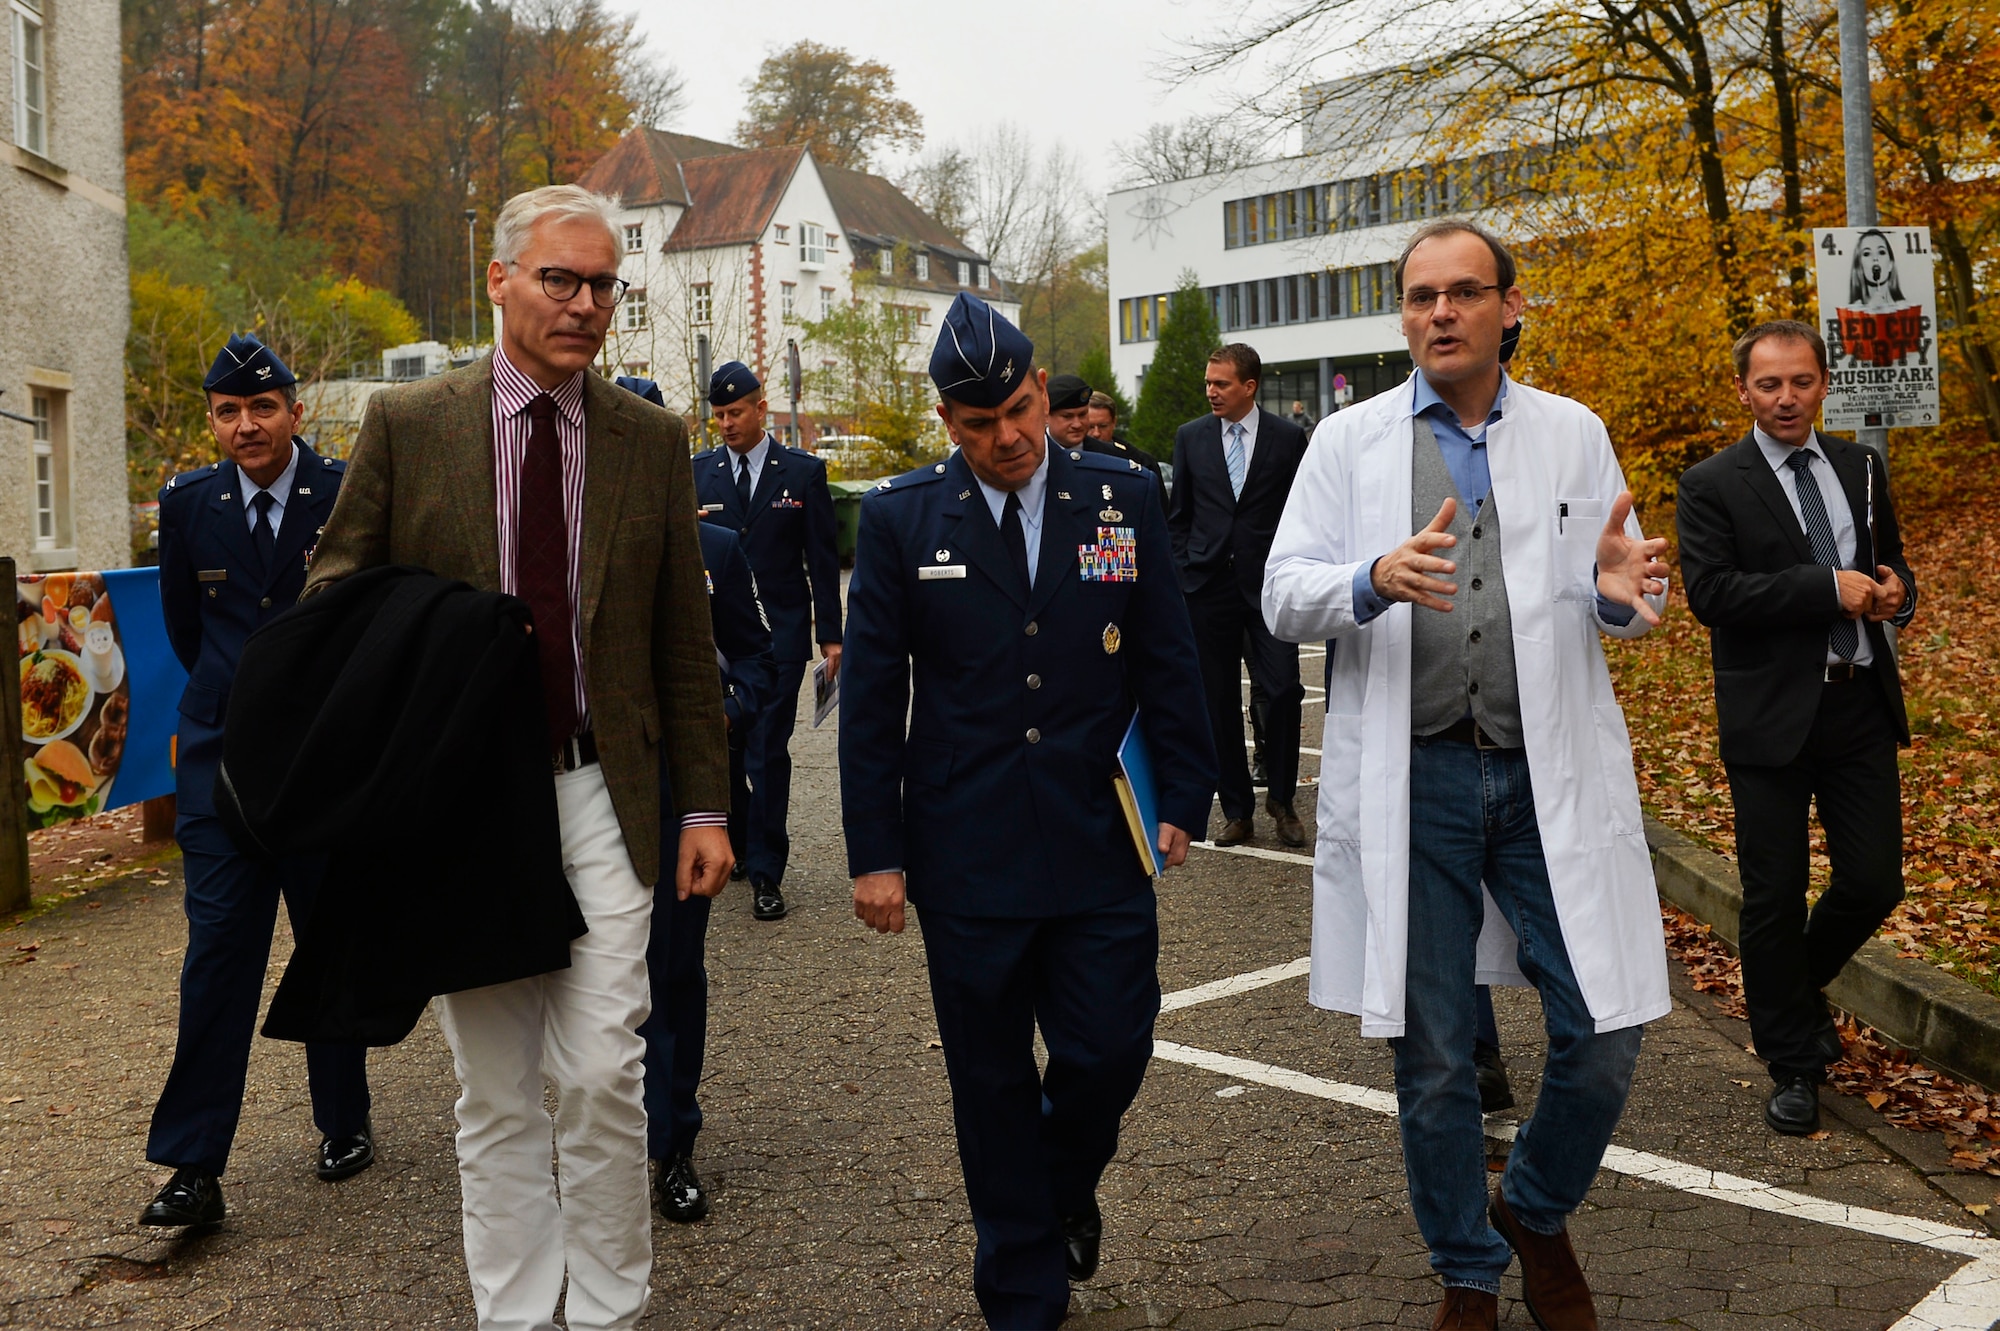 U.S. service members assigned to the 86th Medical Group and Landstuhl Regional Medical Center tour the Saarland University Medical Center in Homburg, Germany Nov. 9, 2017. The tour was organized by the 86th Medical Support Squadron Tricare operations and patient administration flight. (U.S. Air Force photo by Airman 1st Class Joshua Magbanua)